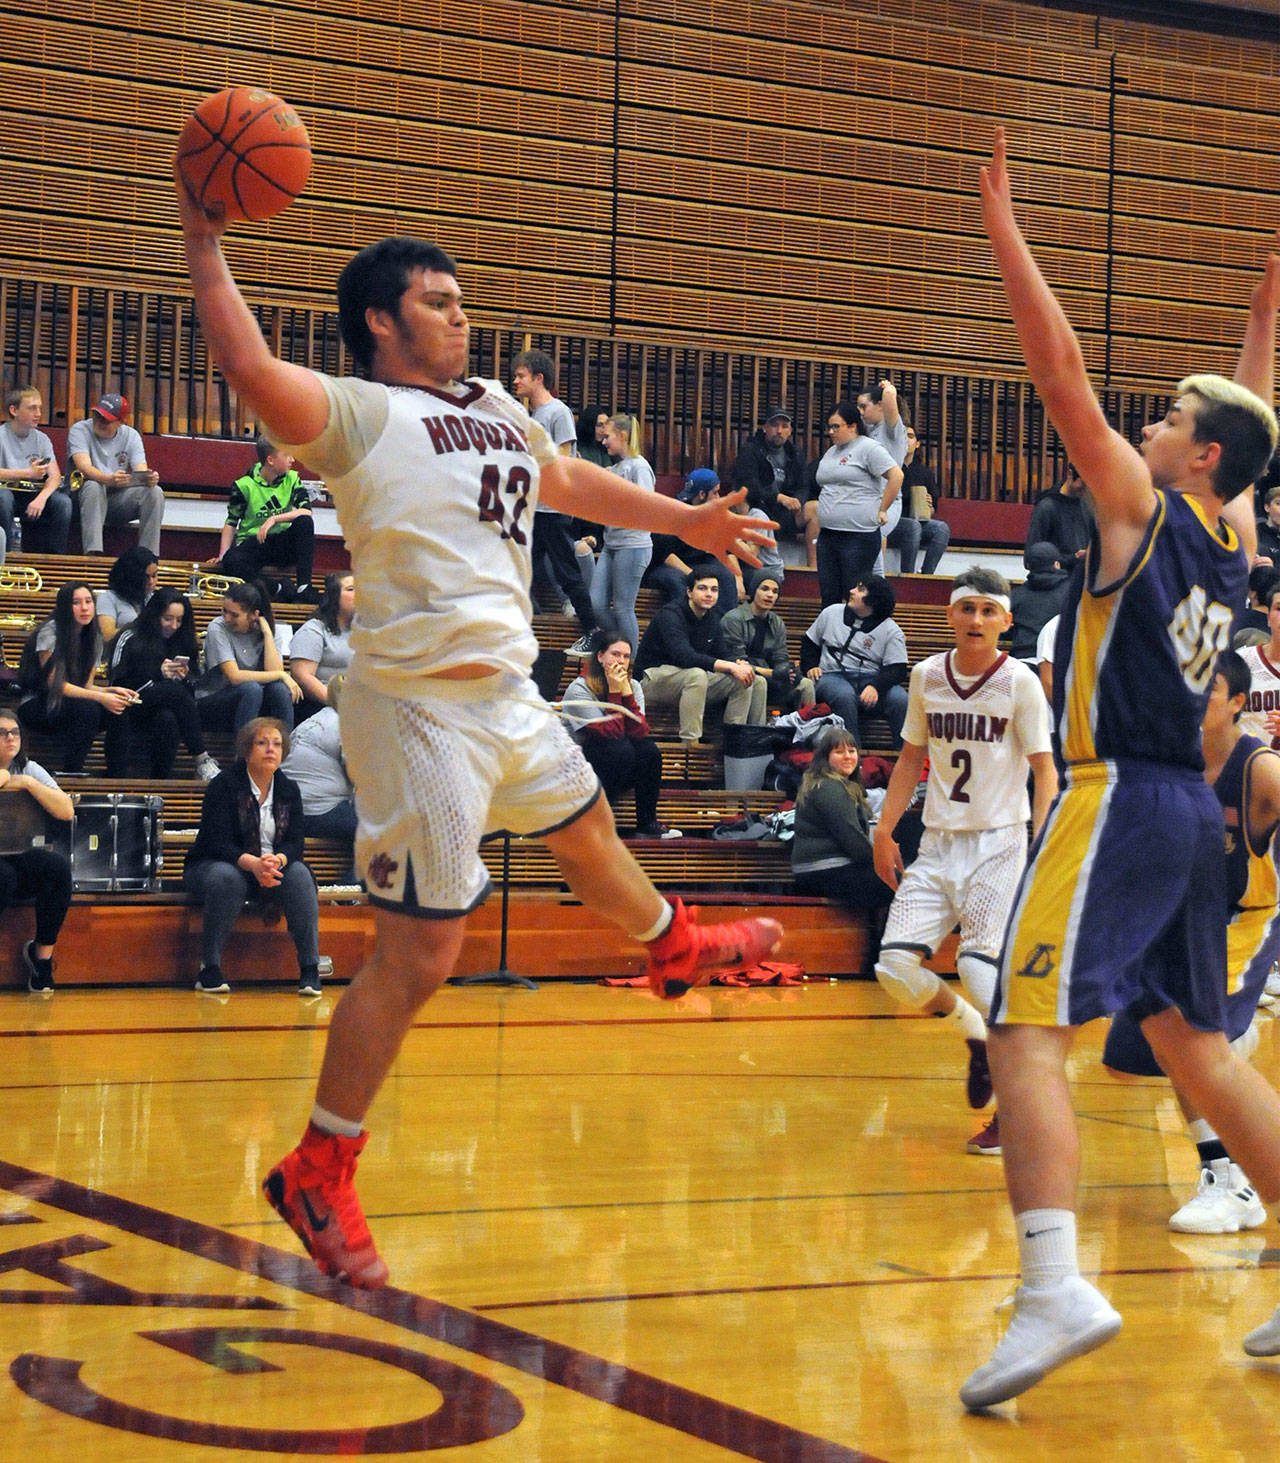 Hoquiam’s Matt Brown, left, attempts to prevent a turnover during the Grizzlies 68-59 season-opening victory over Onalaska on Wednesday in Hoquiam. (Ryan Sparks | Grays Harbor News Group)